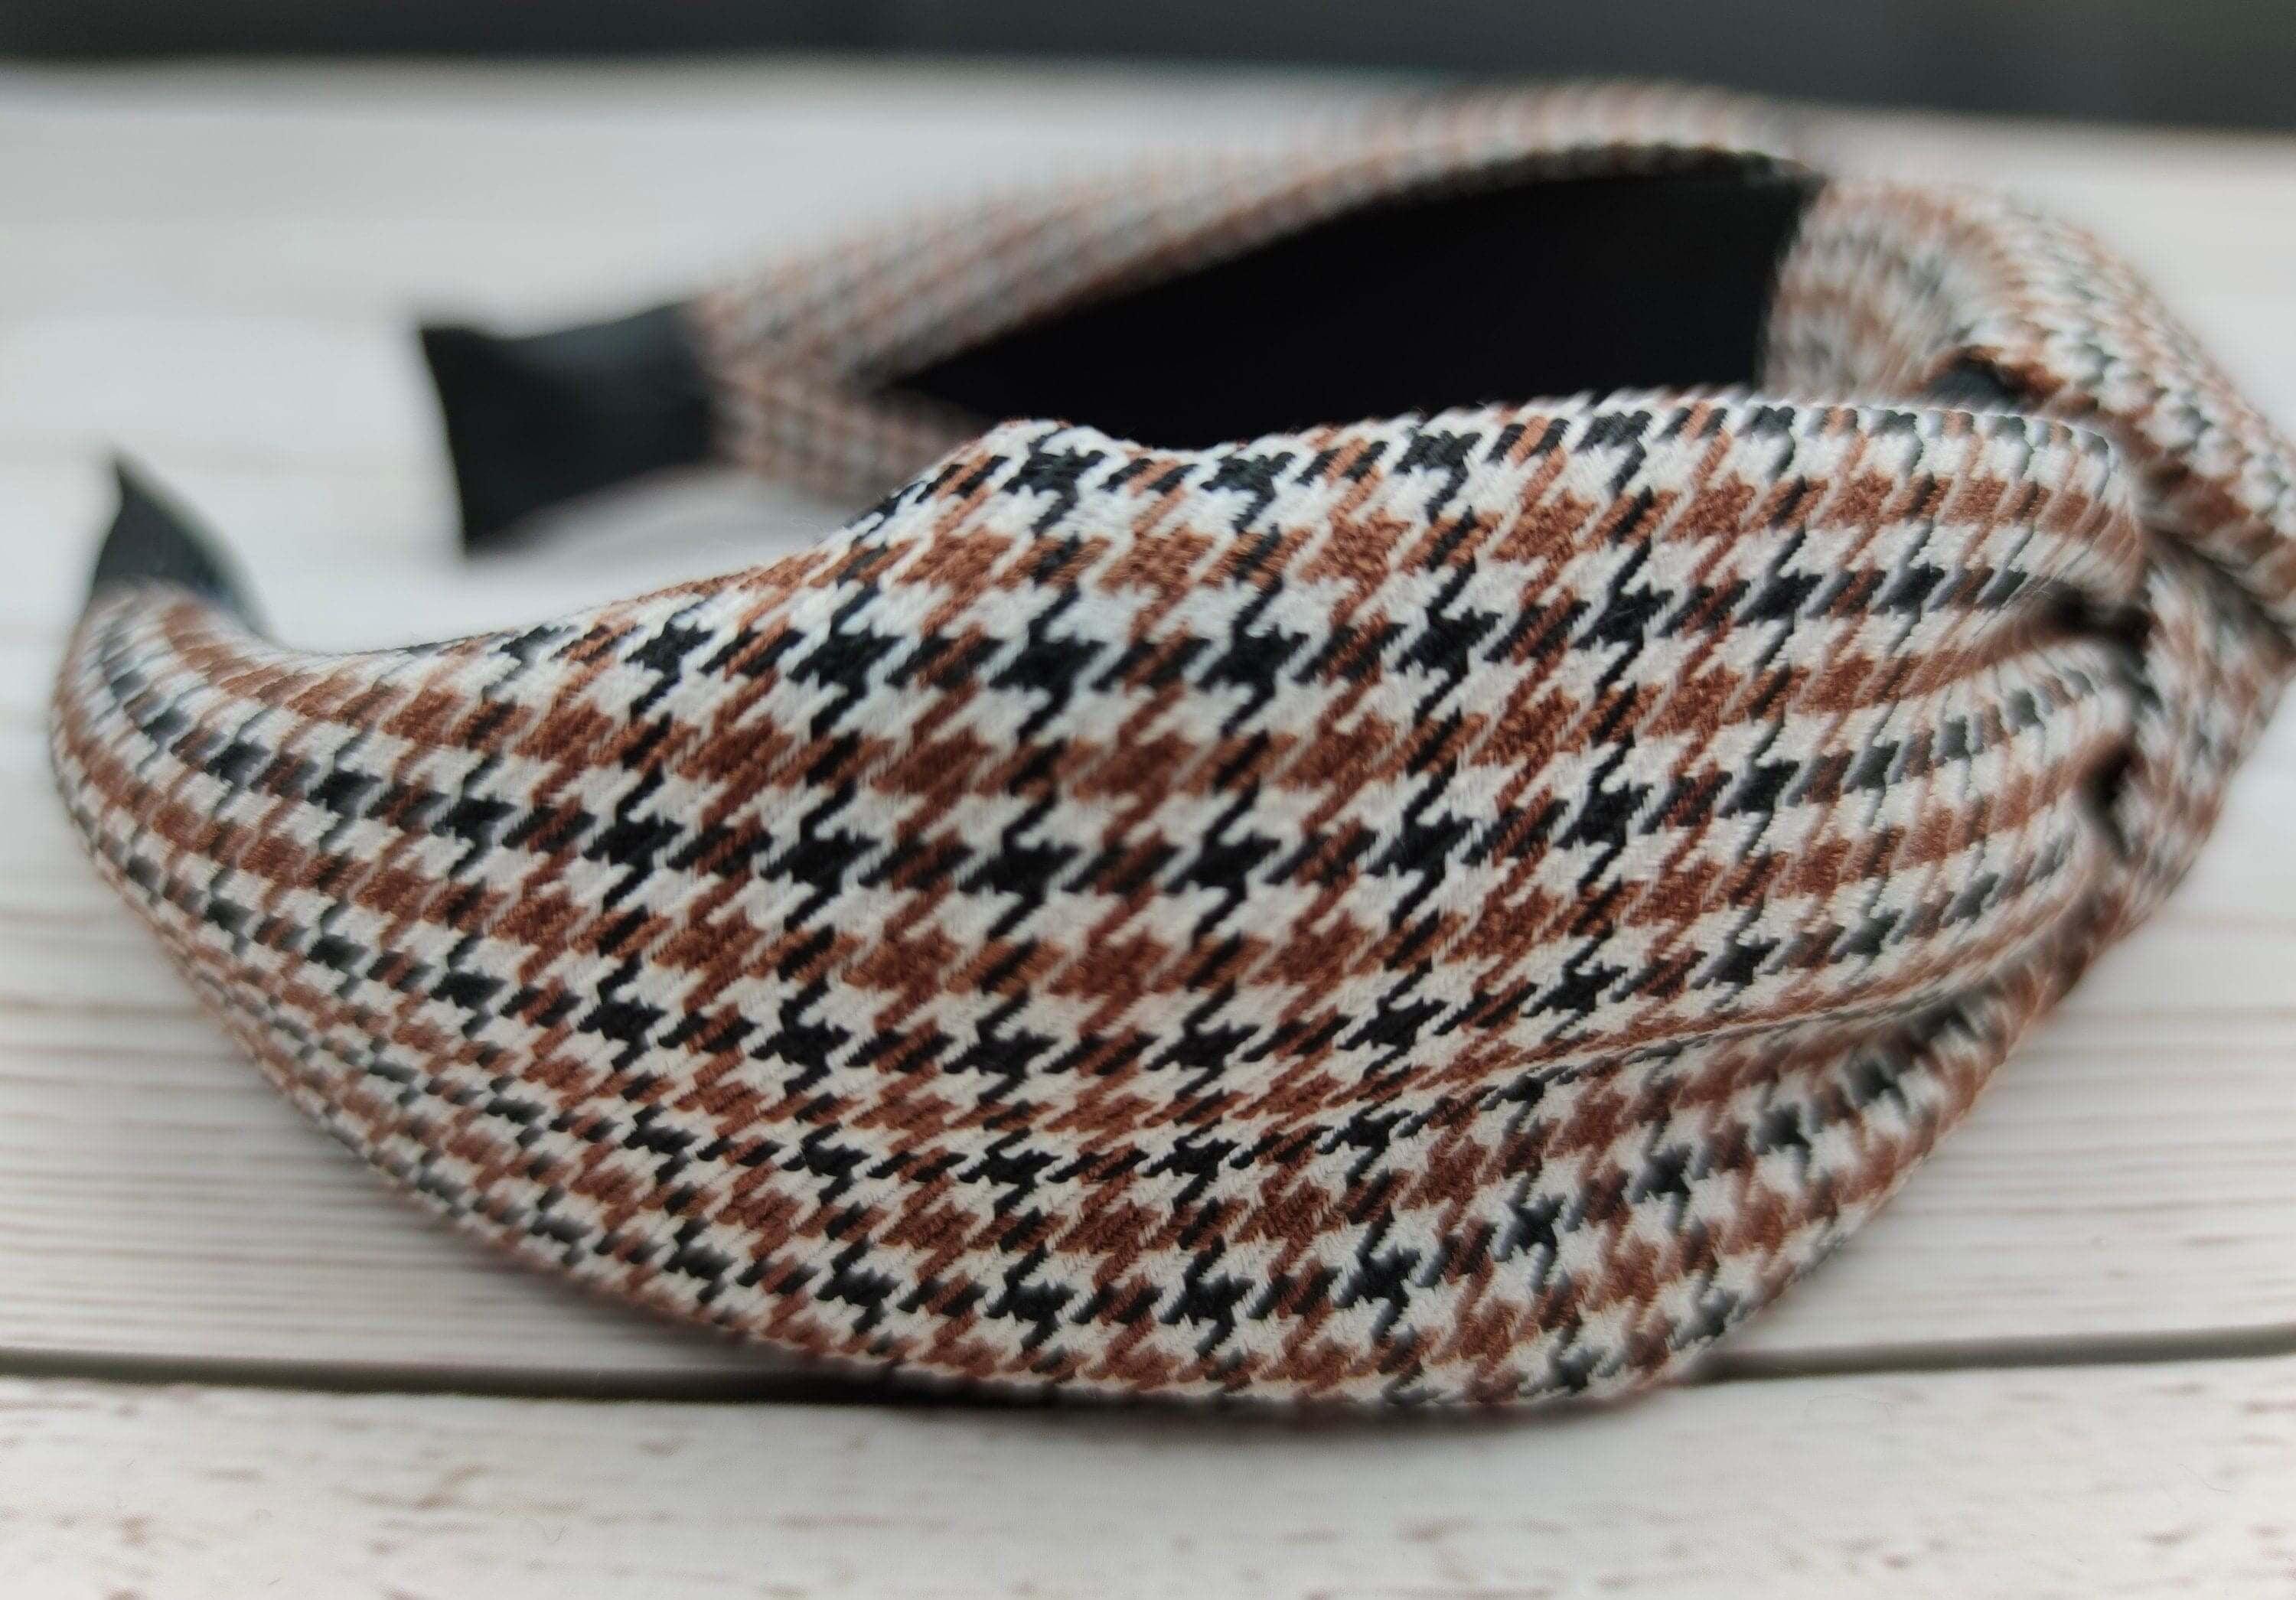 Premium Chic White, Brown and Black Knotted Headband with Plaid Pattern for Women - Perfect for College! available at Moyoni Design